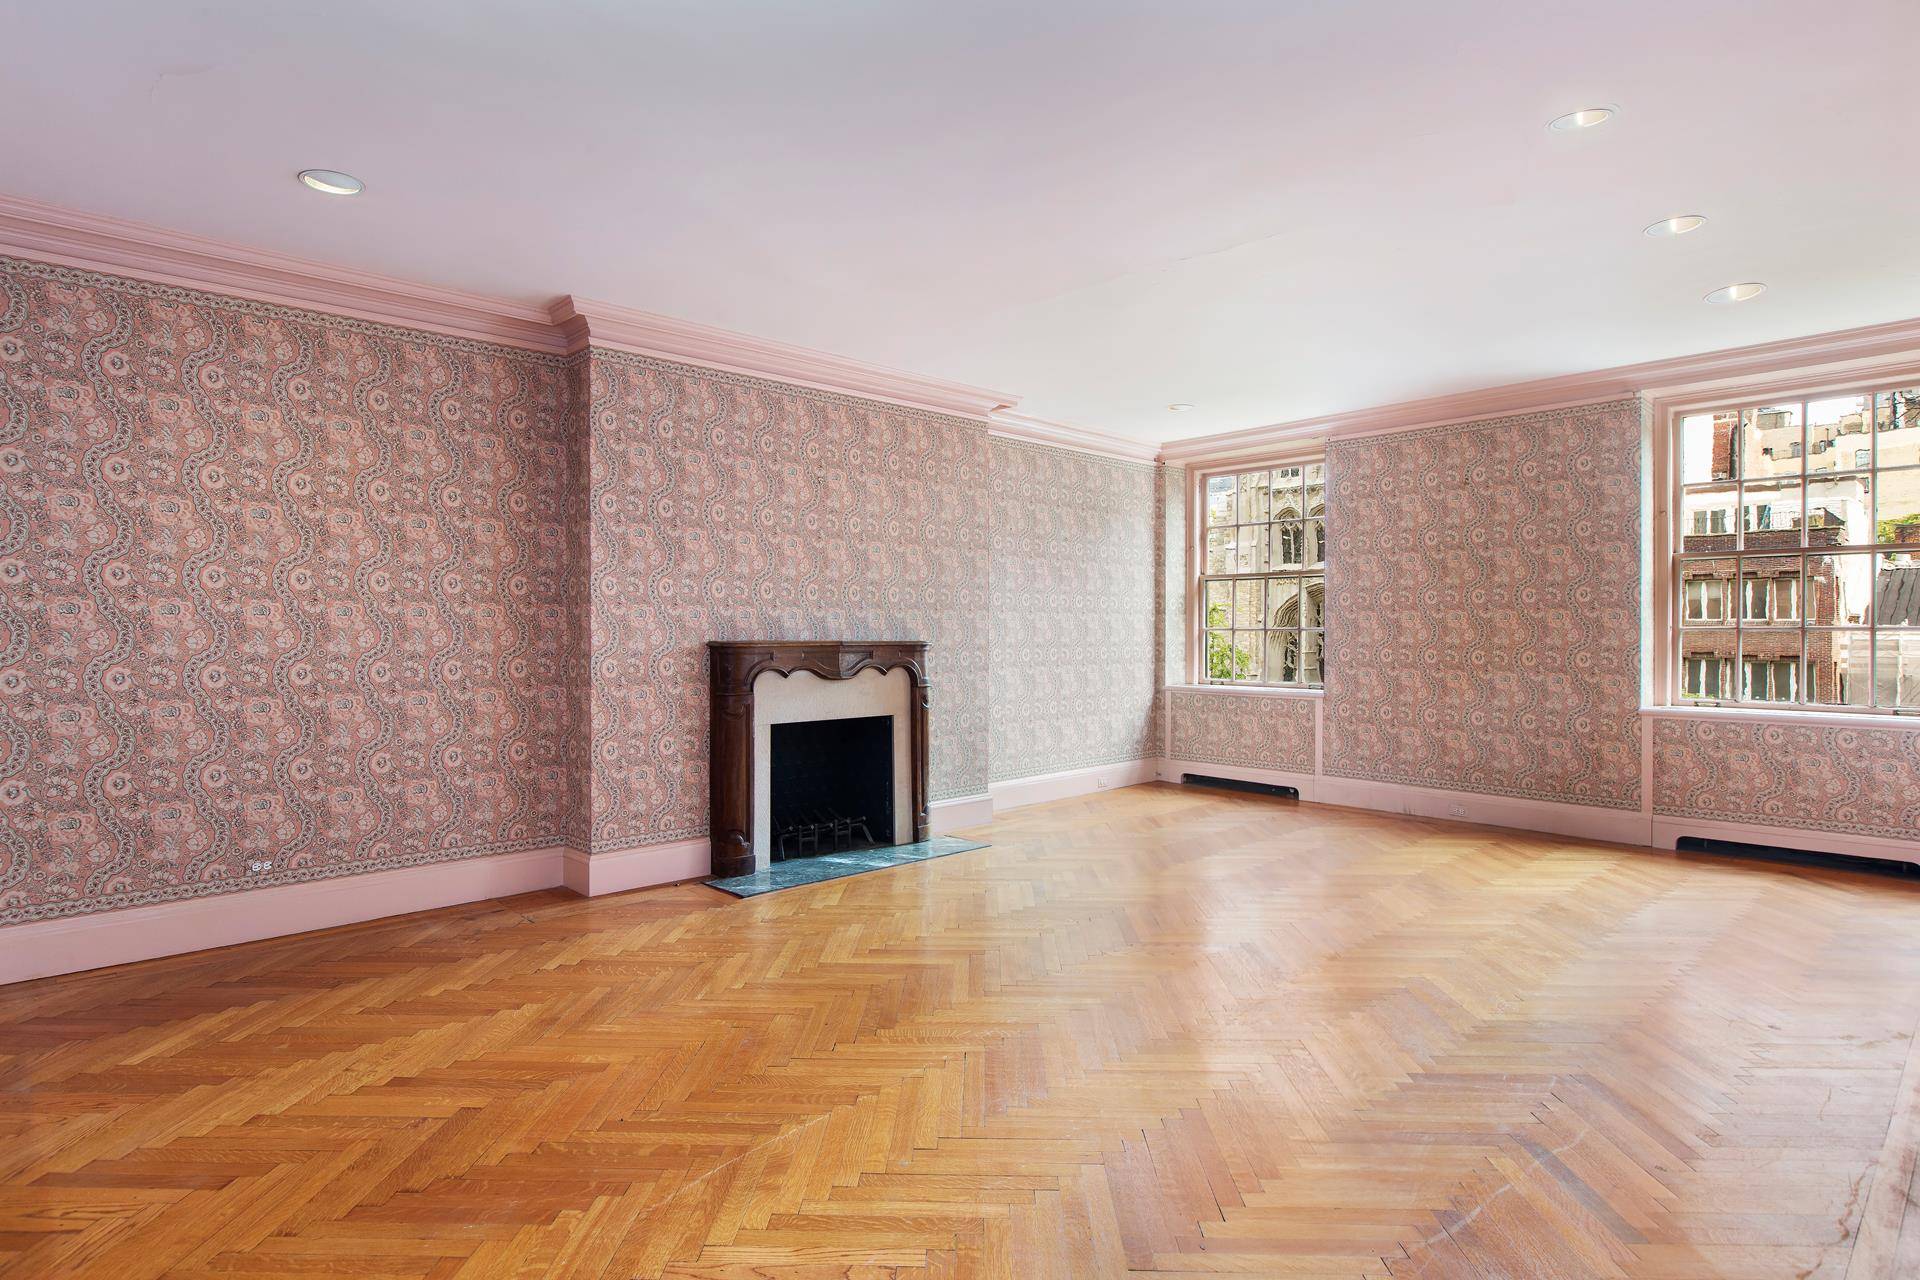 Grand scale, seven room apartment with lovely East views to Park Avenue and churches from most primary rooms, this classic cooperative apartment offers exceptionally gracious entrance gallery, beautifully proportioned living ...